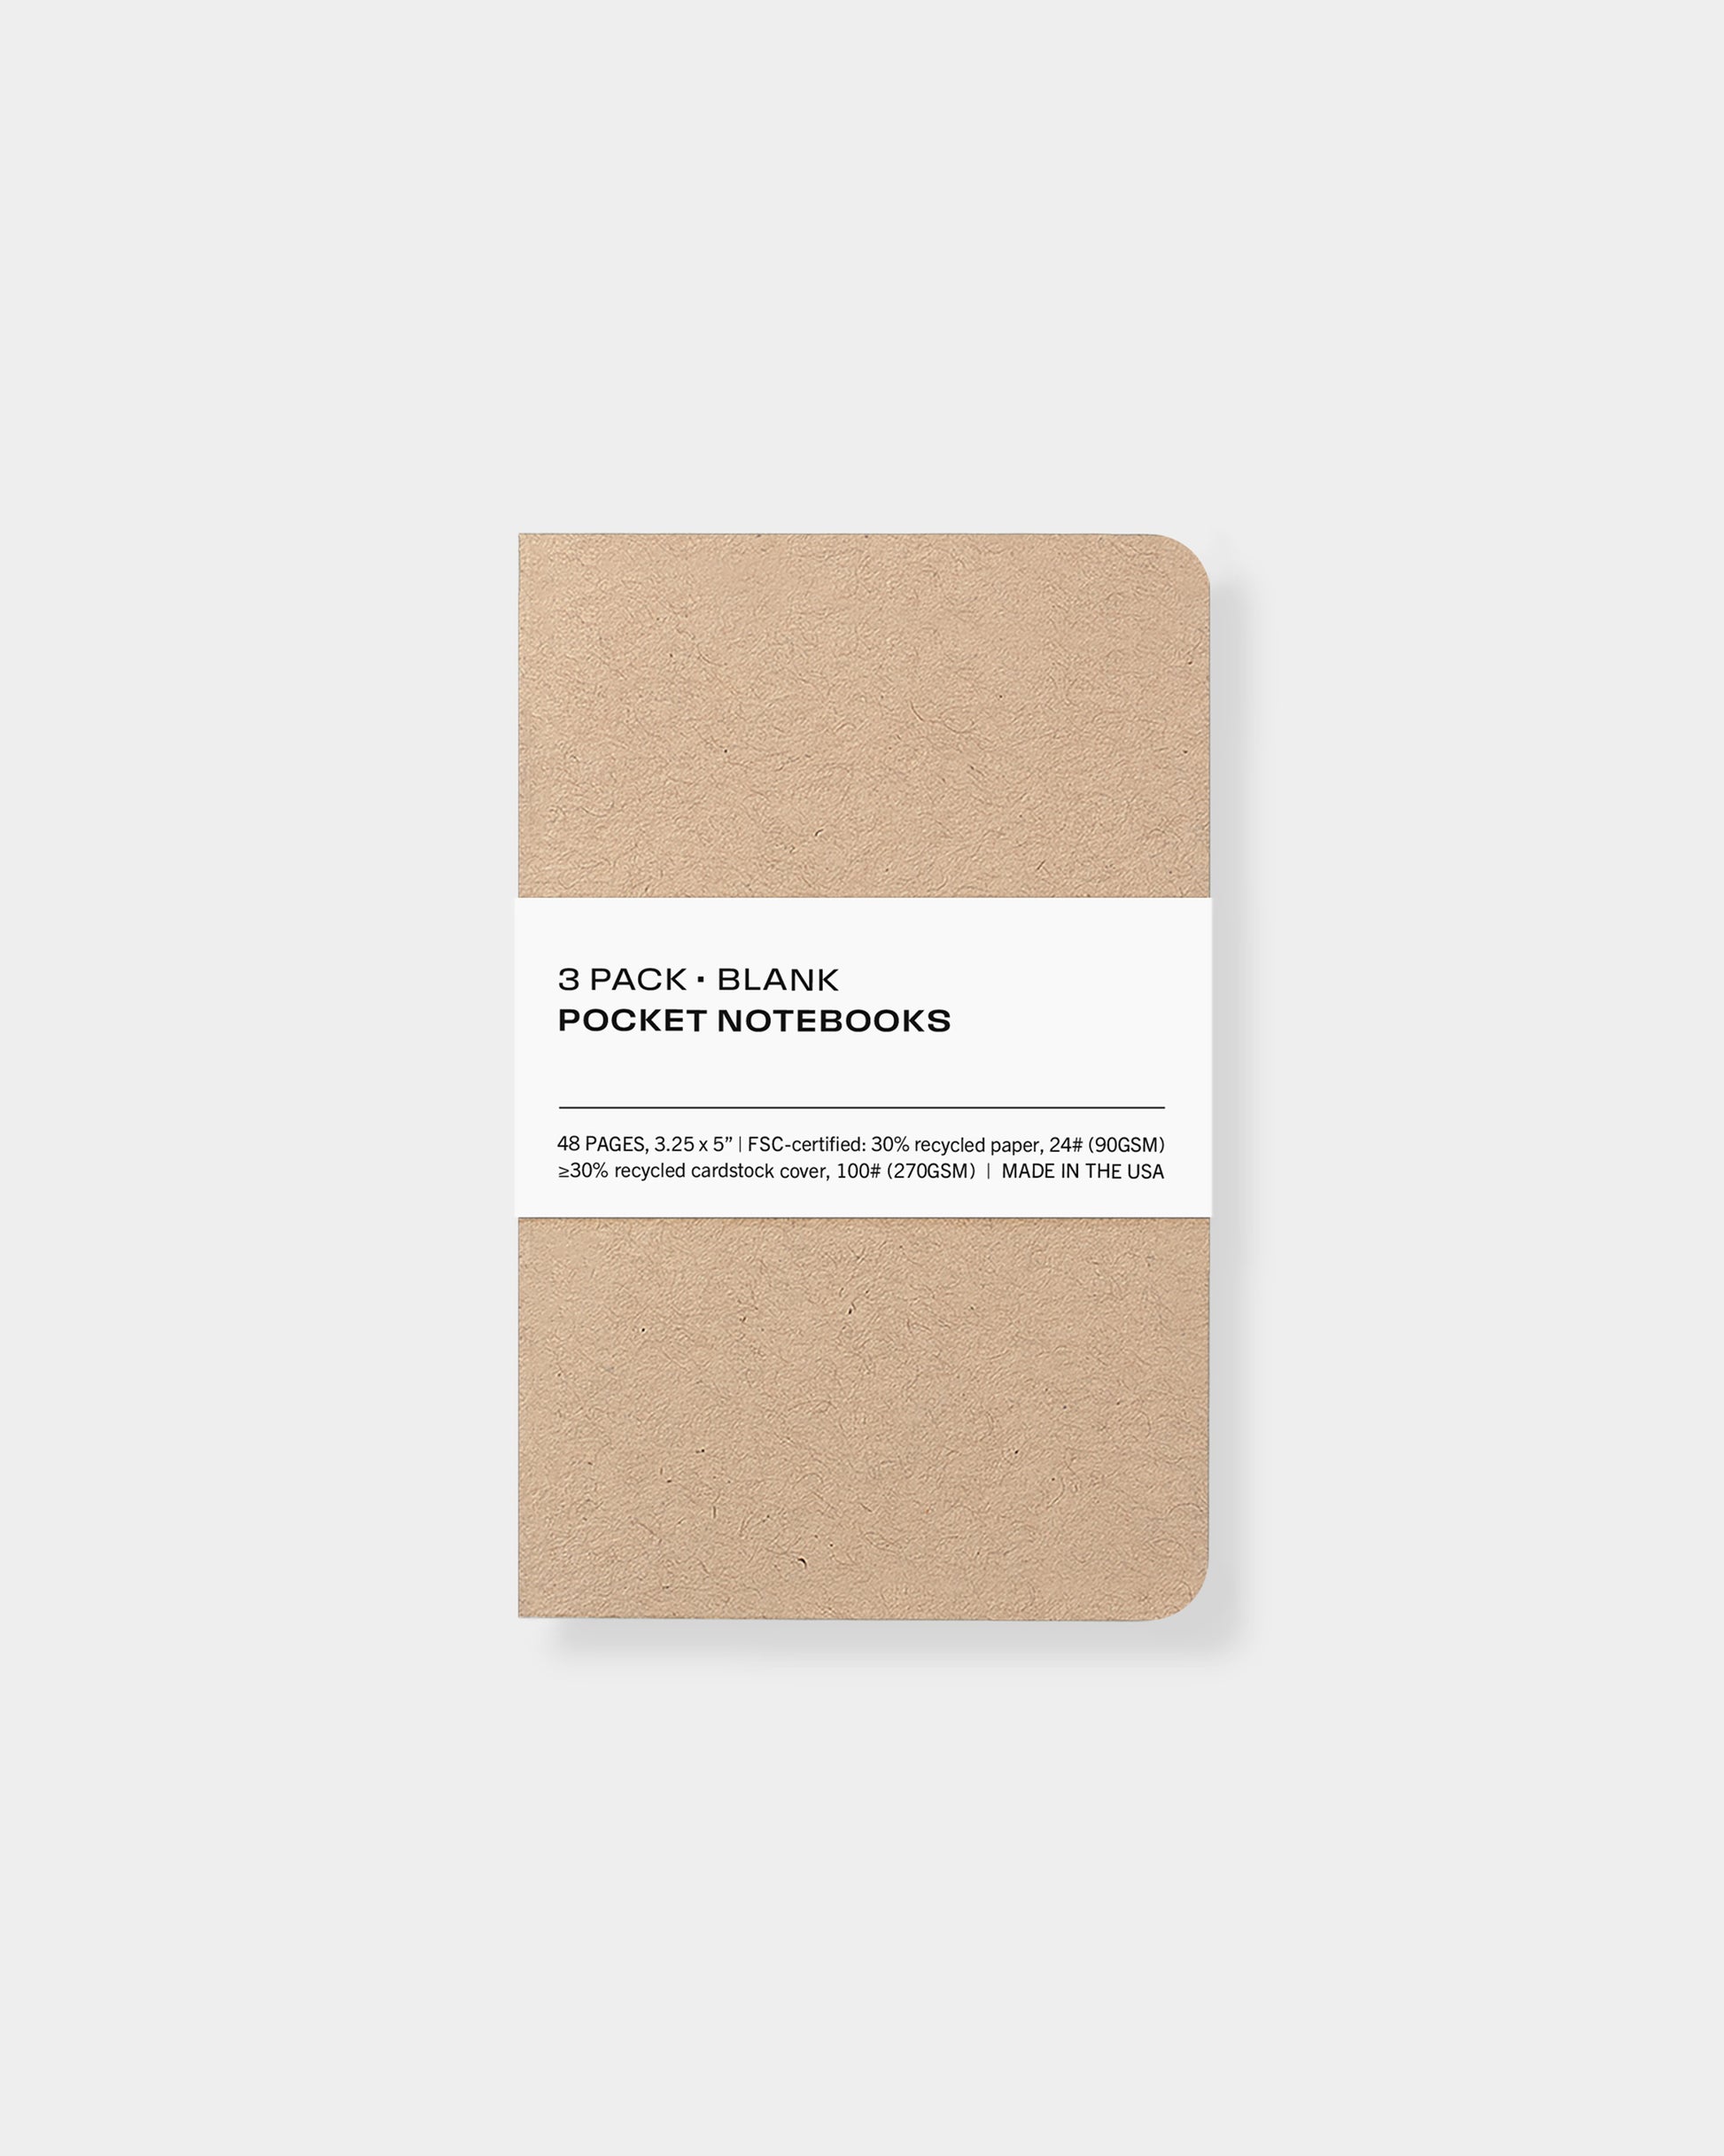 3 pack pocket notebooks, 3.25 x 5", made with eco-friendly papers. Blank pages, kraft color way.